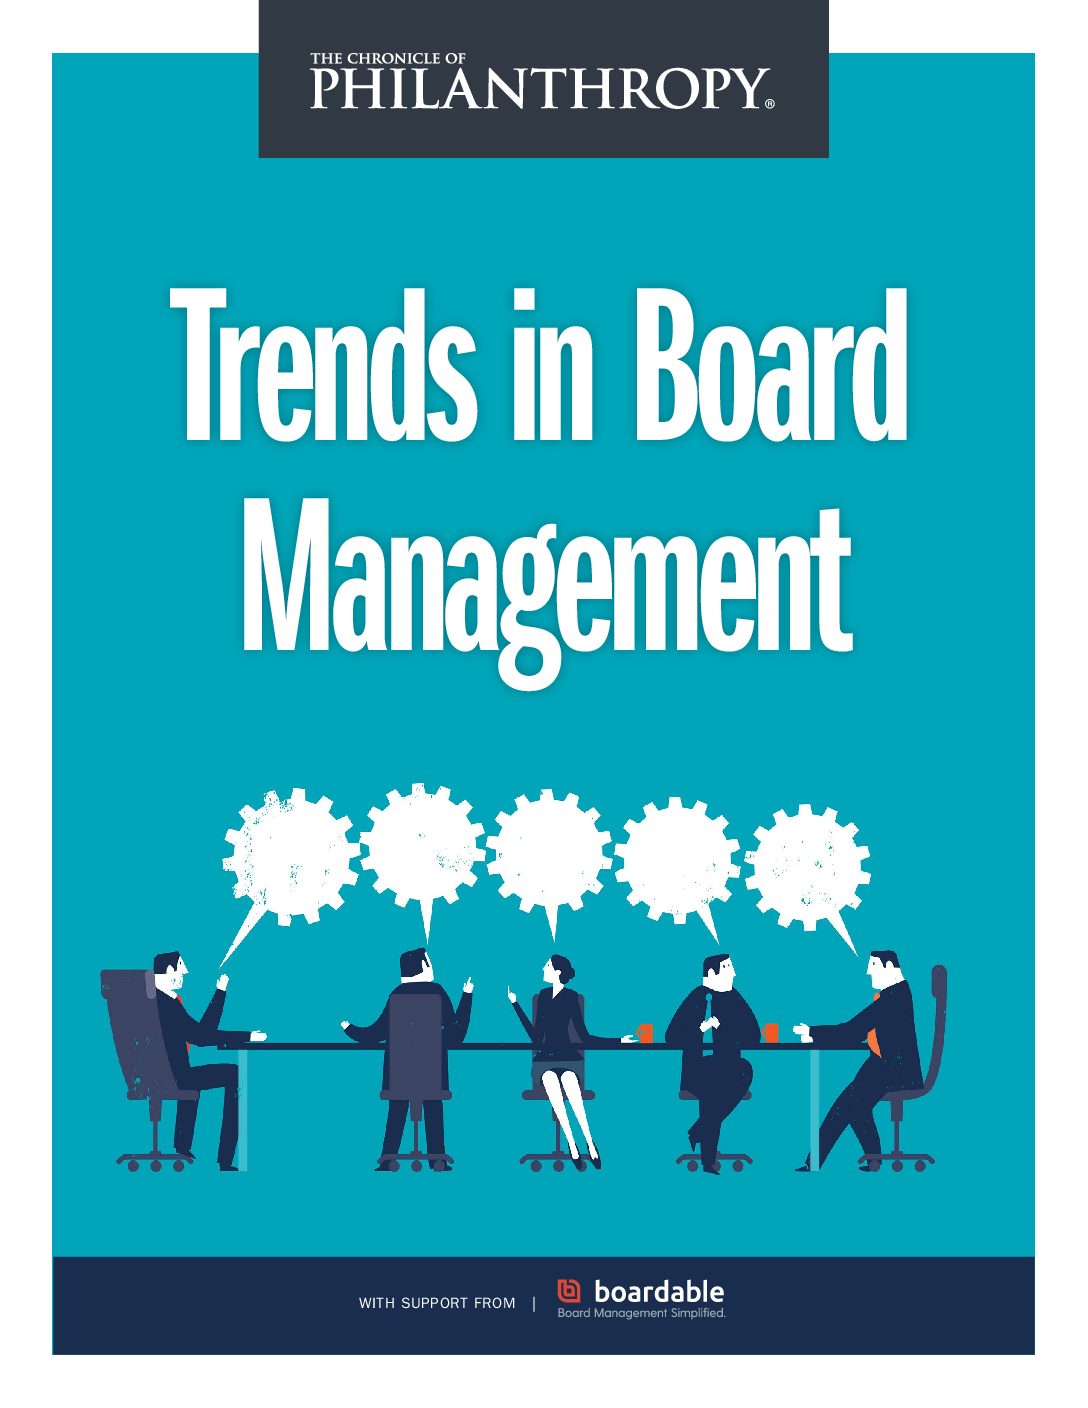 Board Management Trends Article Collection - From Chronicle of Philanthropy and Boardable Board Management Software